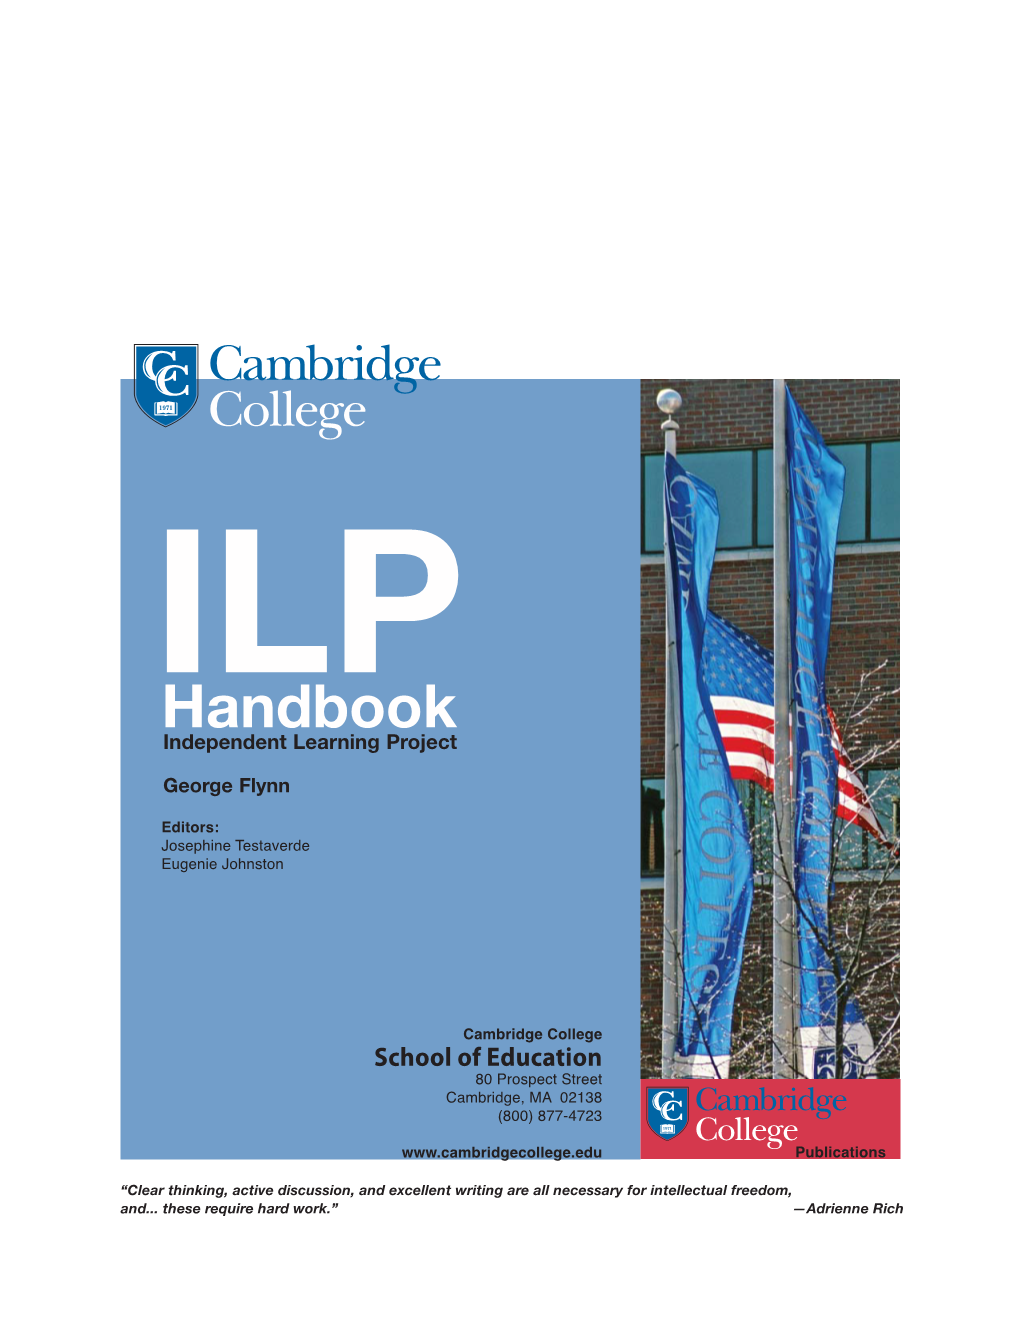 Handbook Independent Learning Project